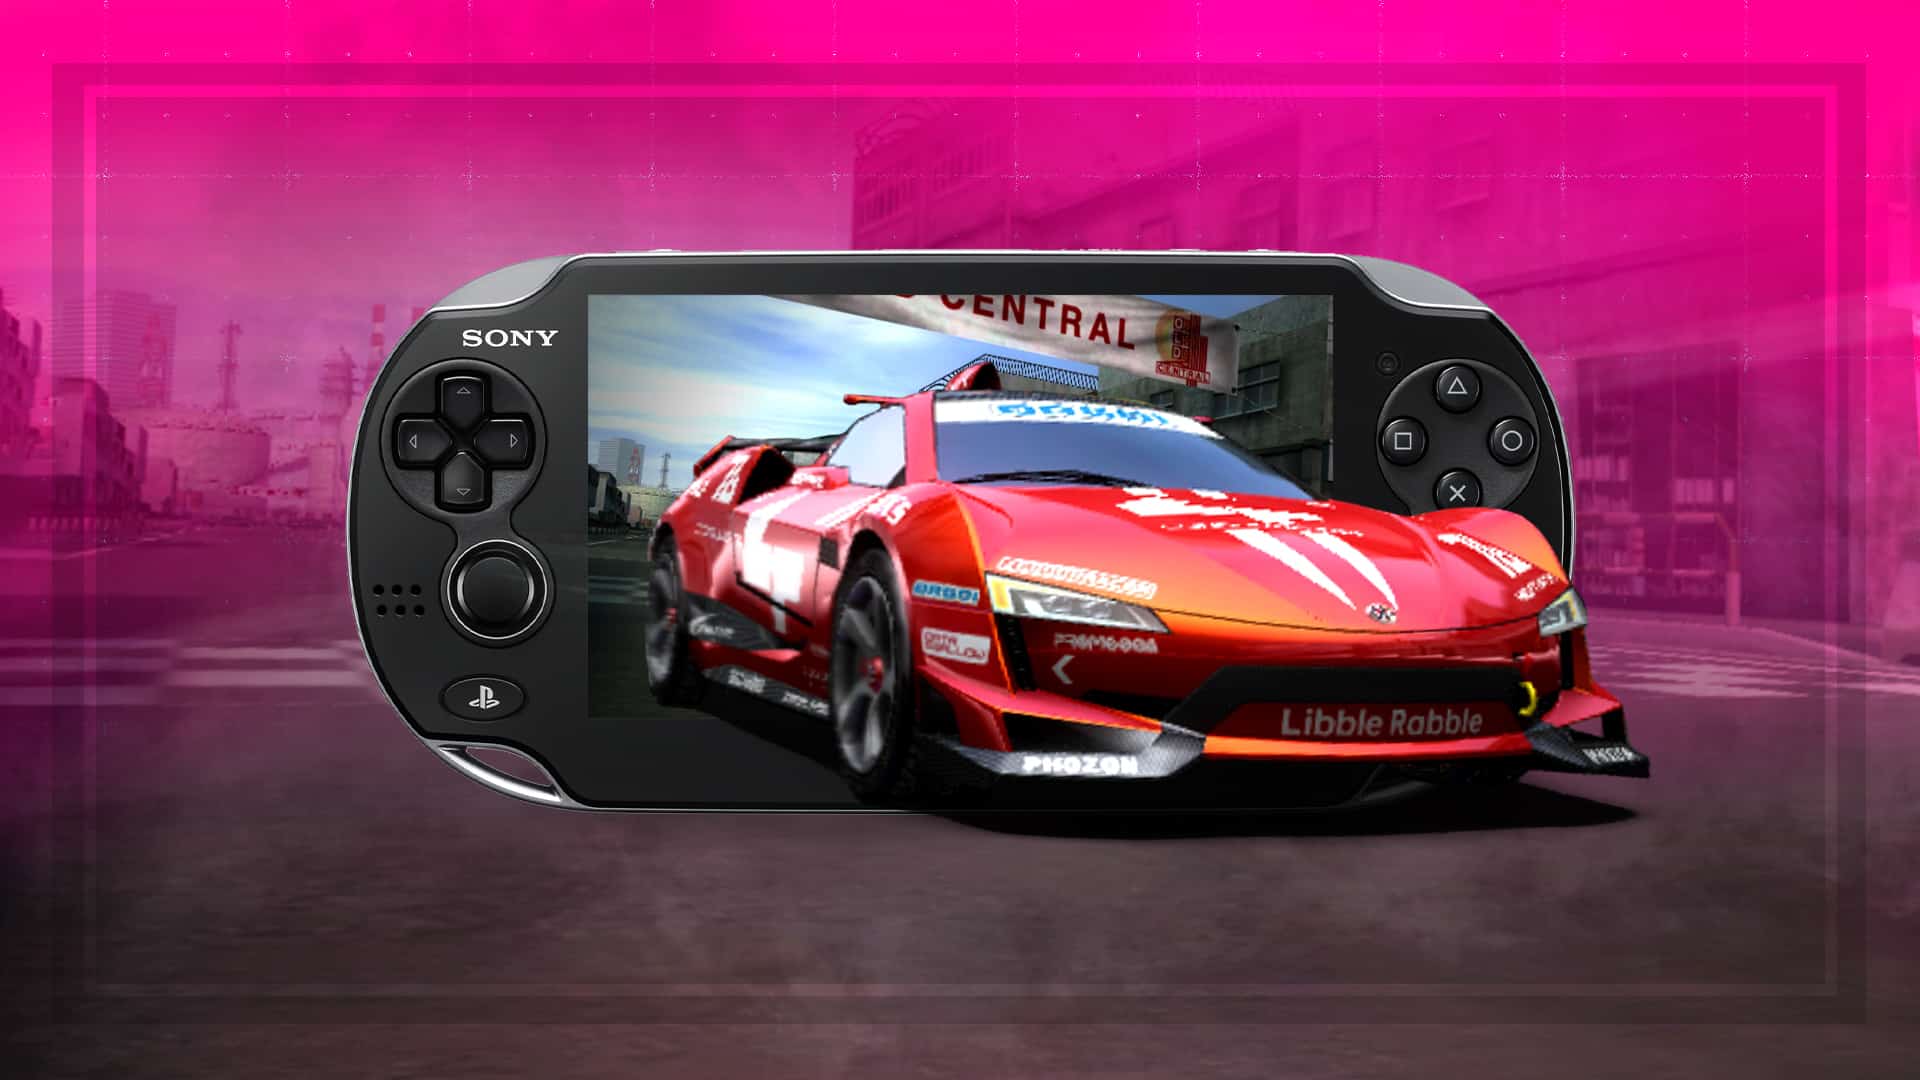 Today, Roblox has enhanced the PlayStation Vita, and even went to